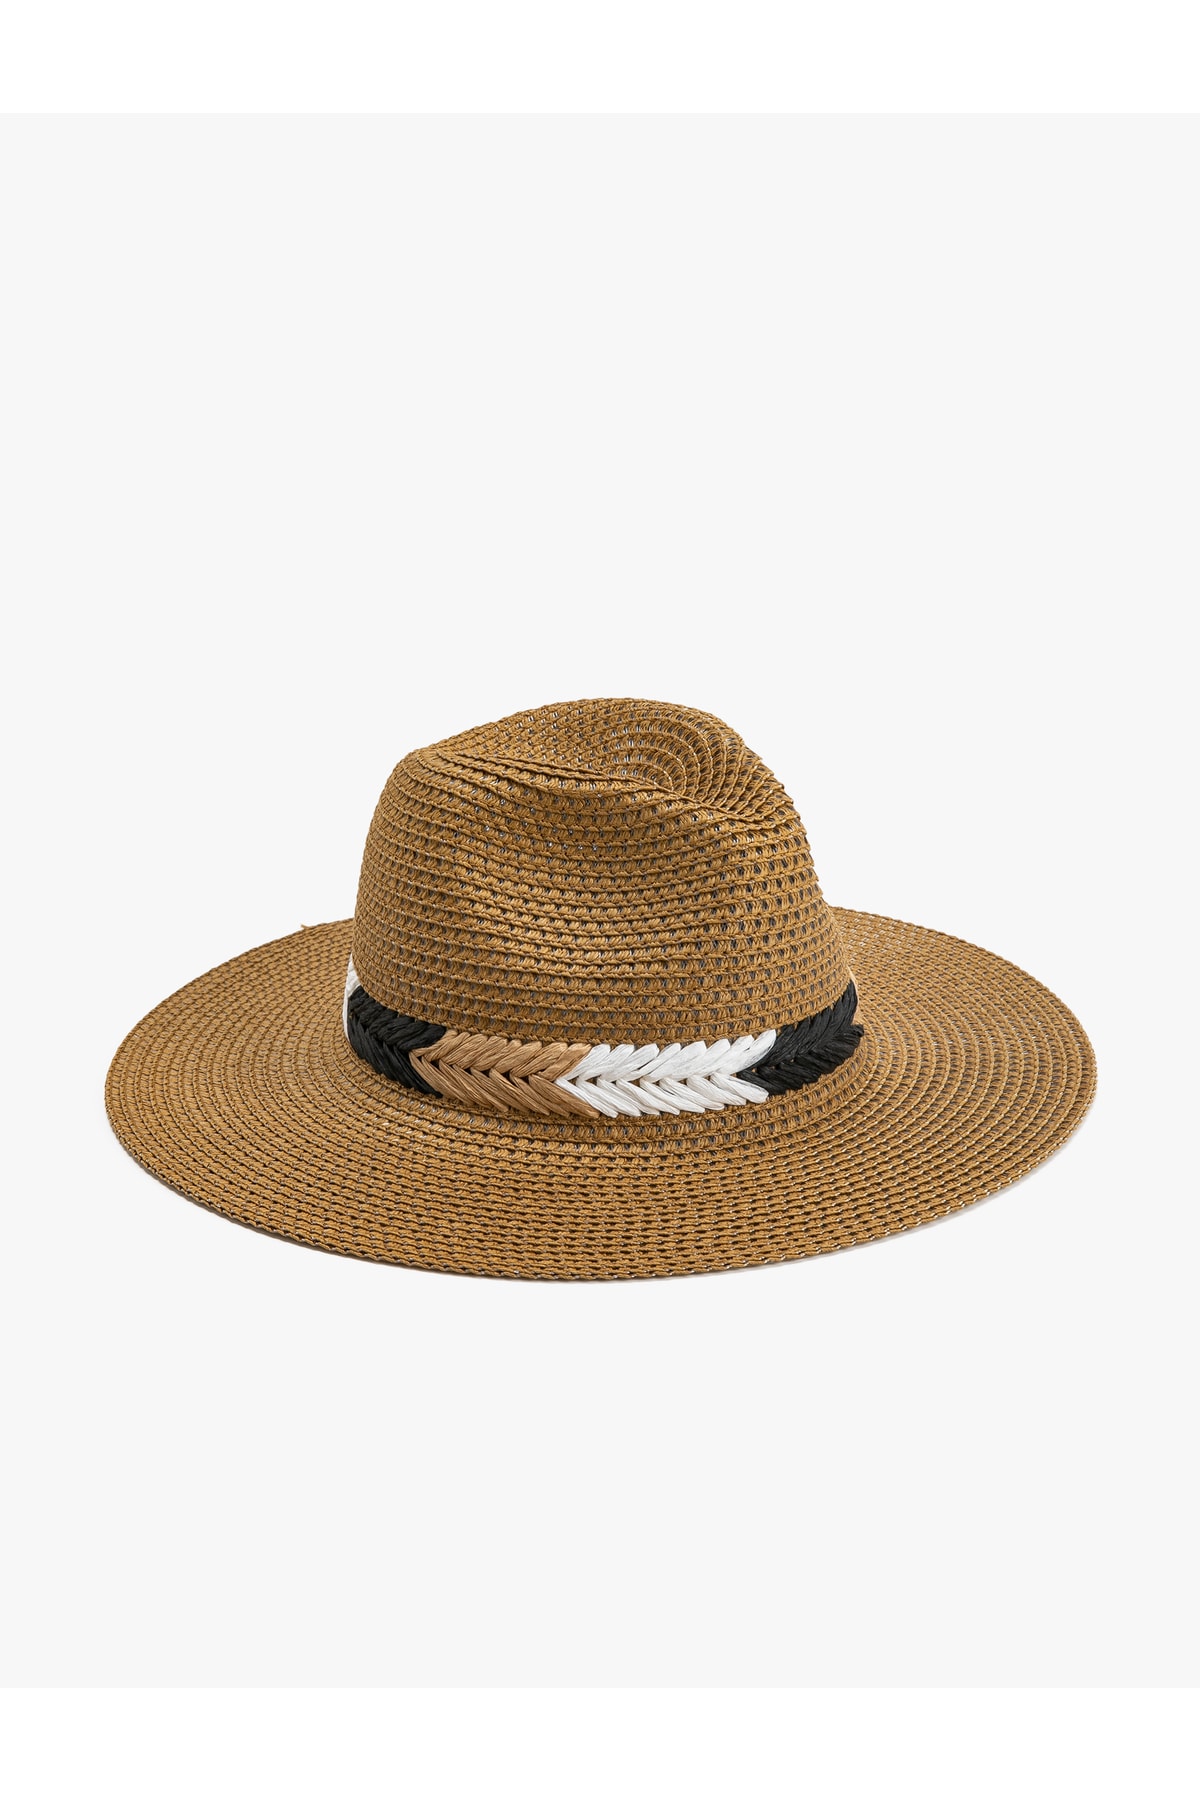 Koton Straw Hat Trilby Colored Embroidery Detailed